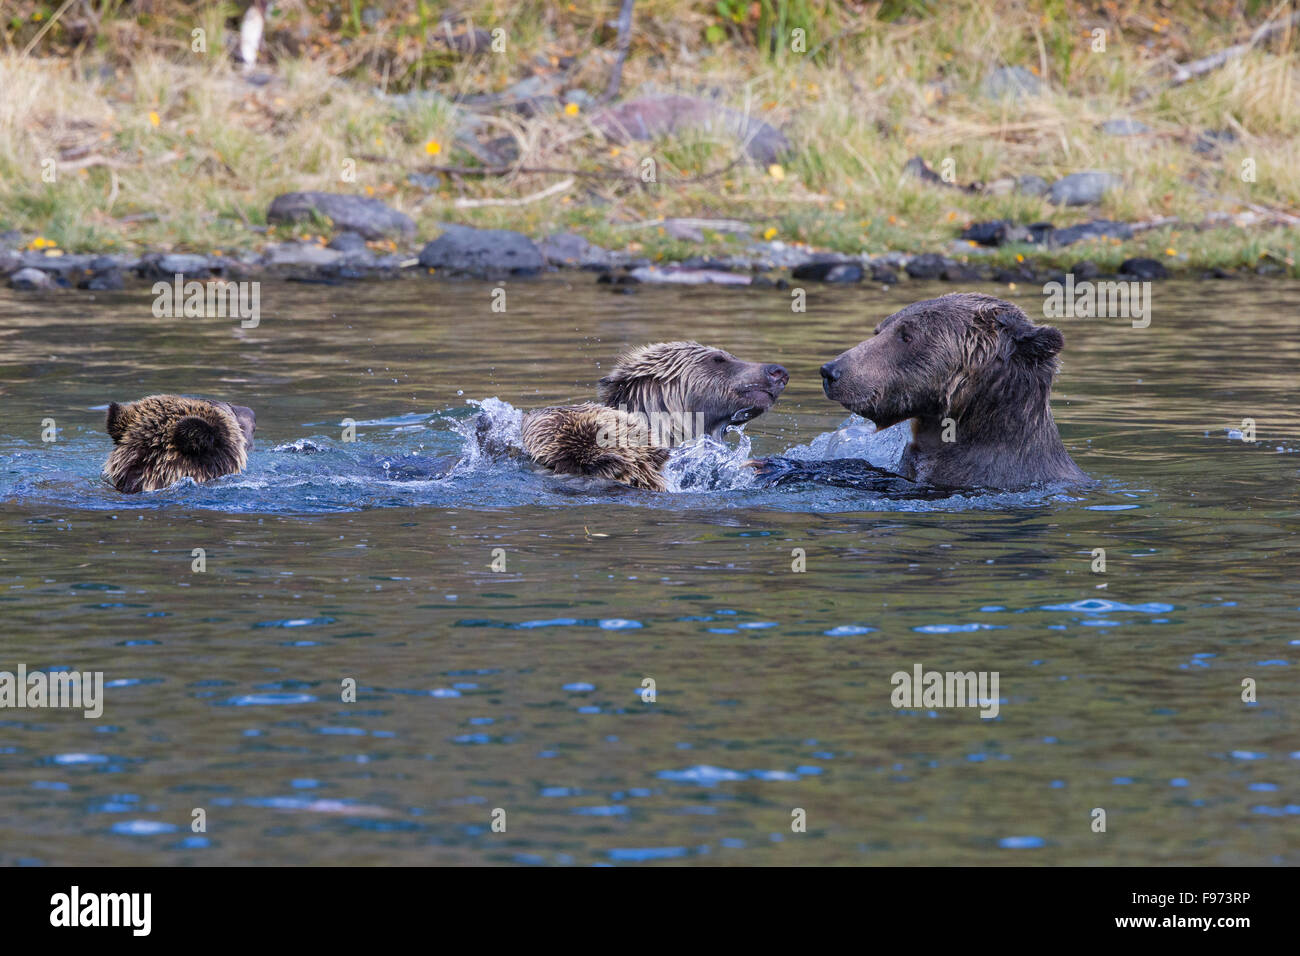 Grizzly bear (Ursus arctos horribilis), female (right) and twoyear old cubs play wrestling in river, Central Interior, British Stock Photo